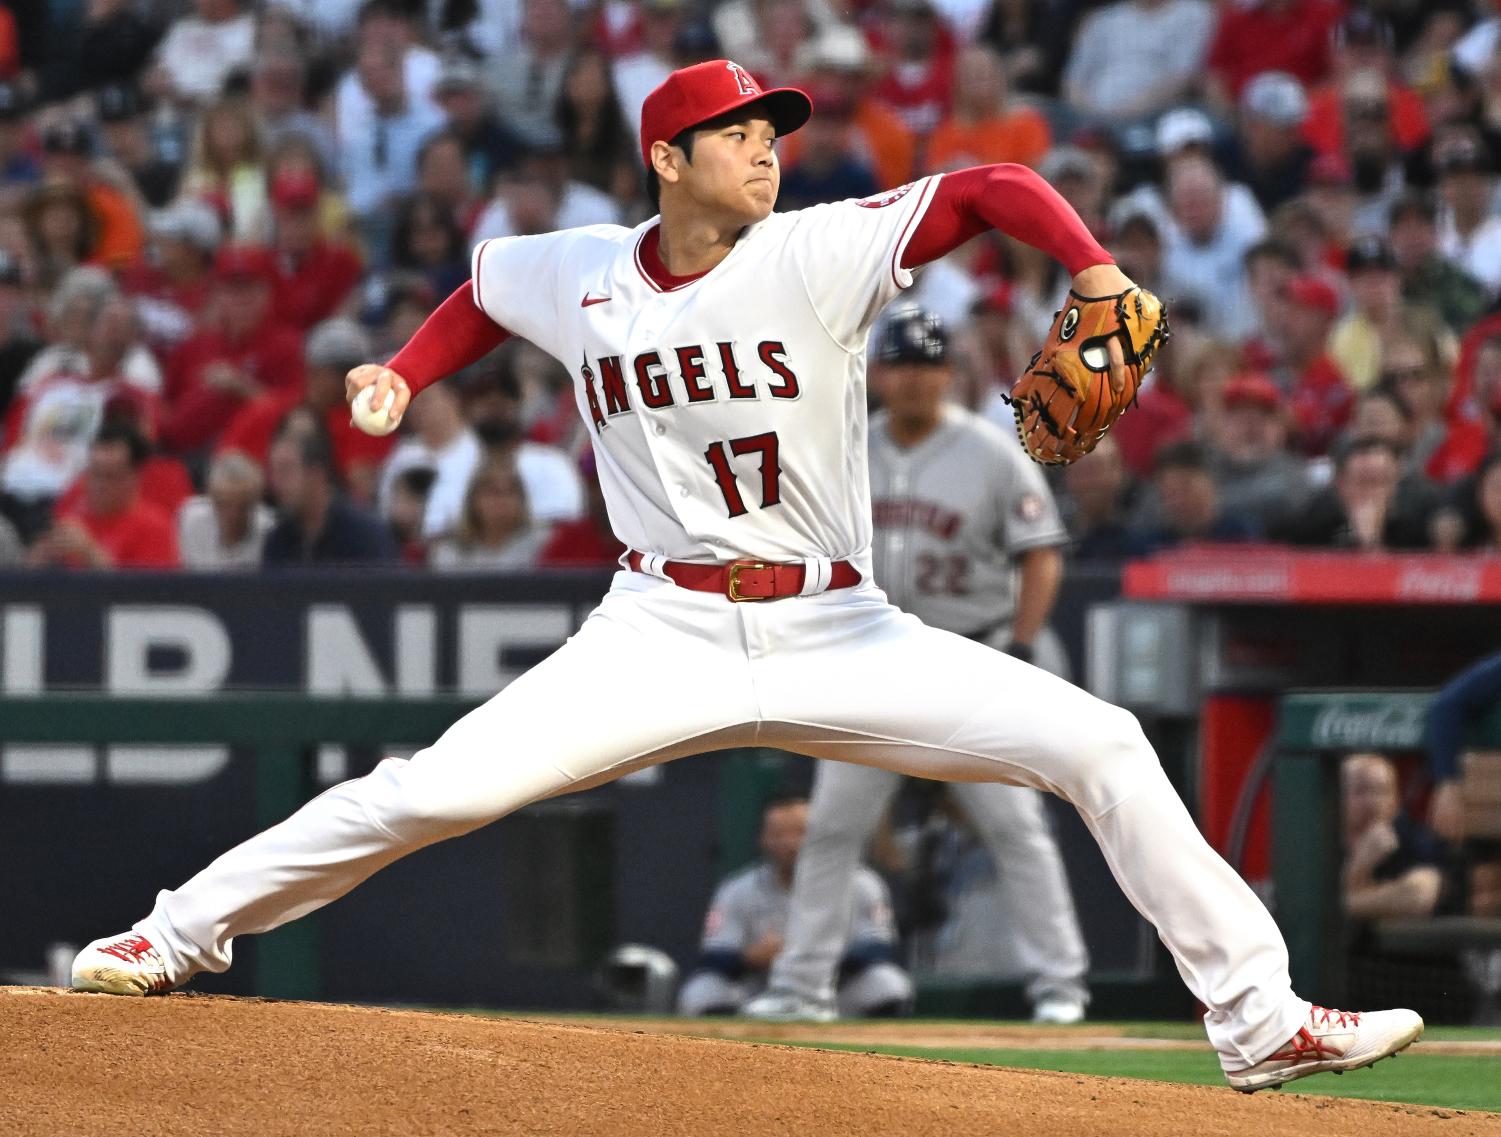 Opinion%3A+Shohei+Ohtani+is+leading+the+charge+of+a+new+kind+of+baseball